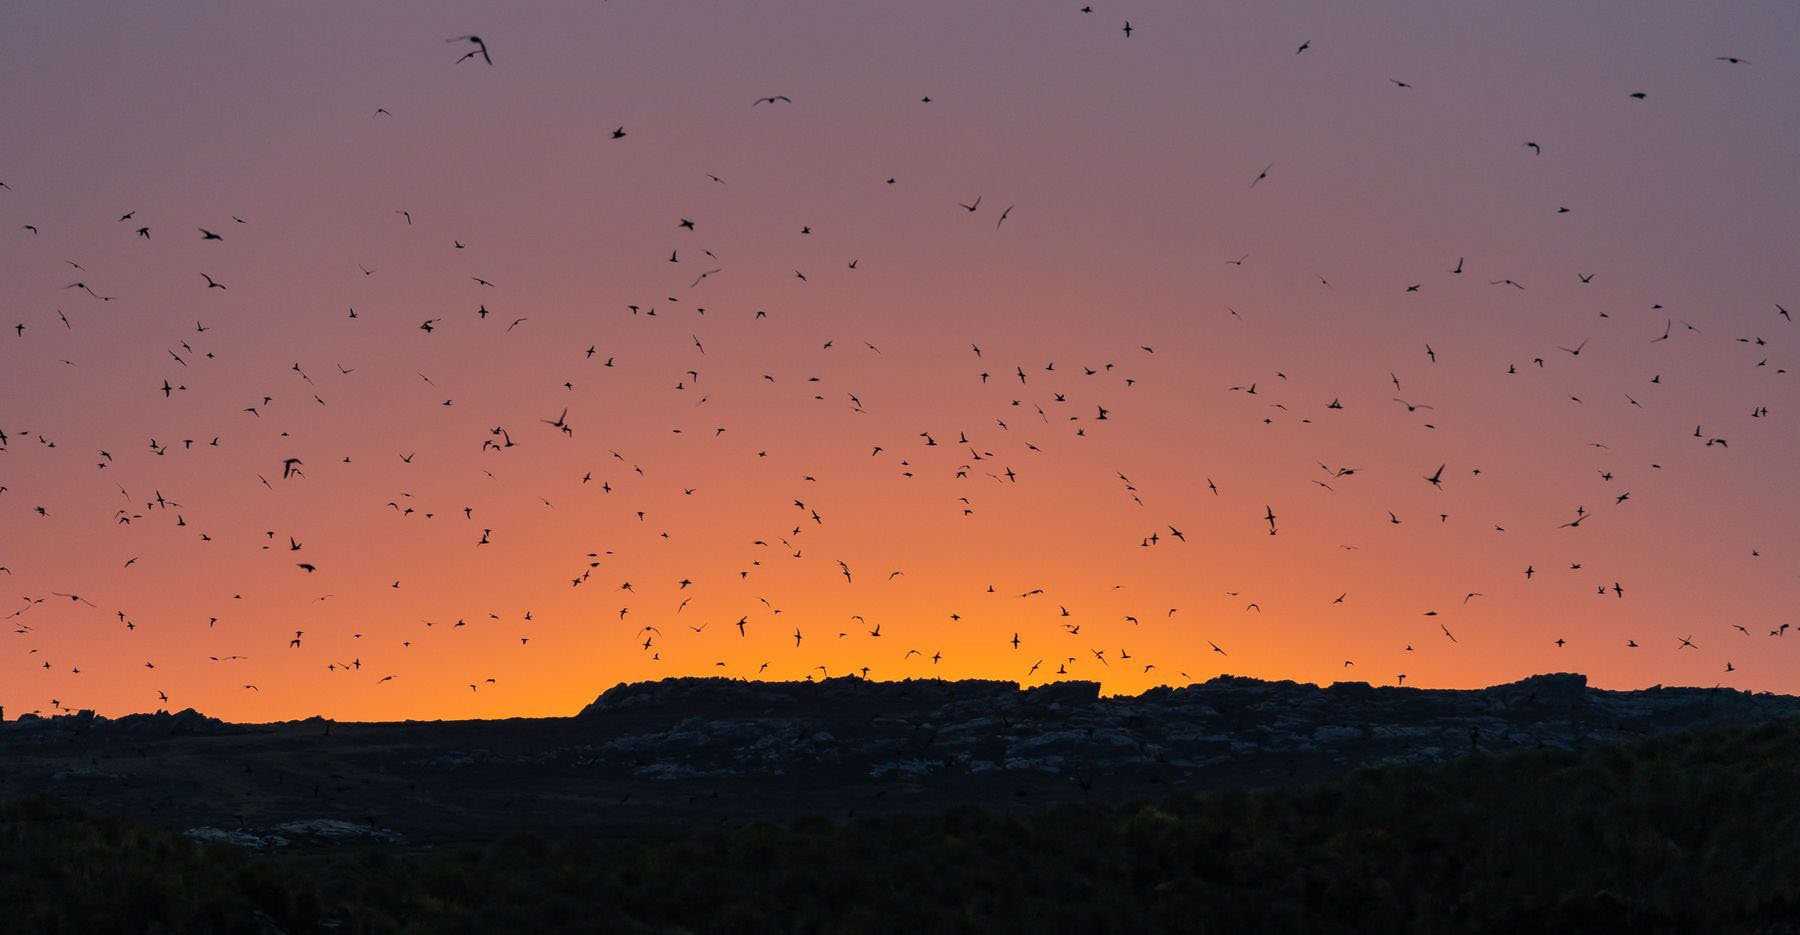 sunset over cliffs with birds